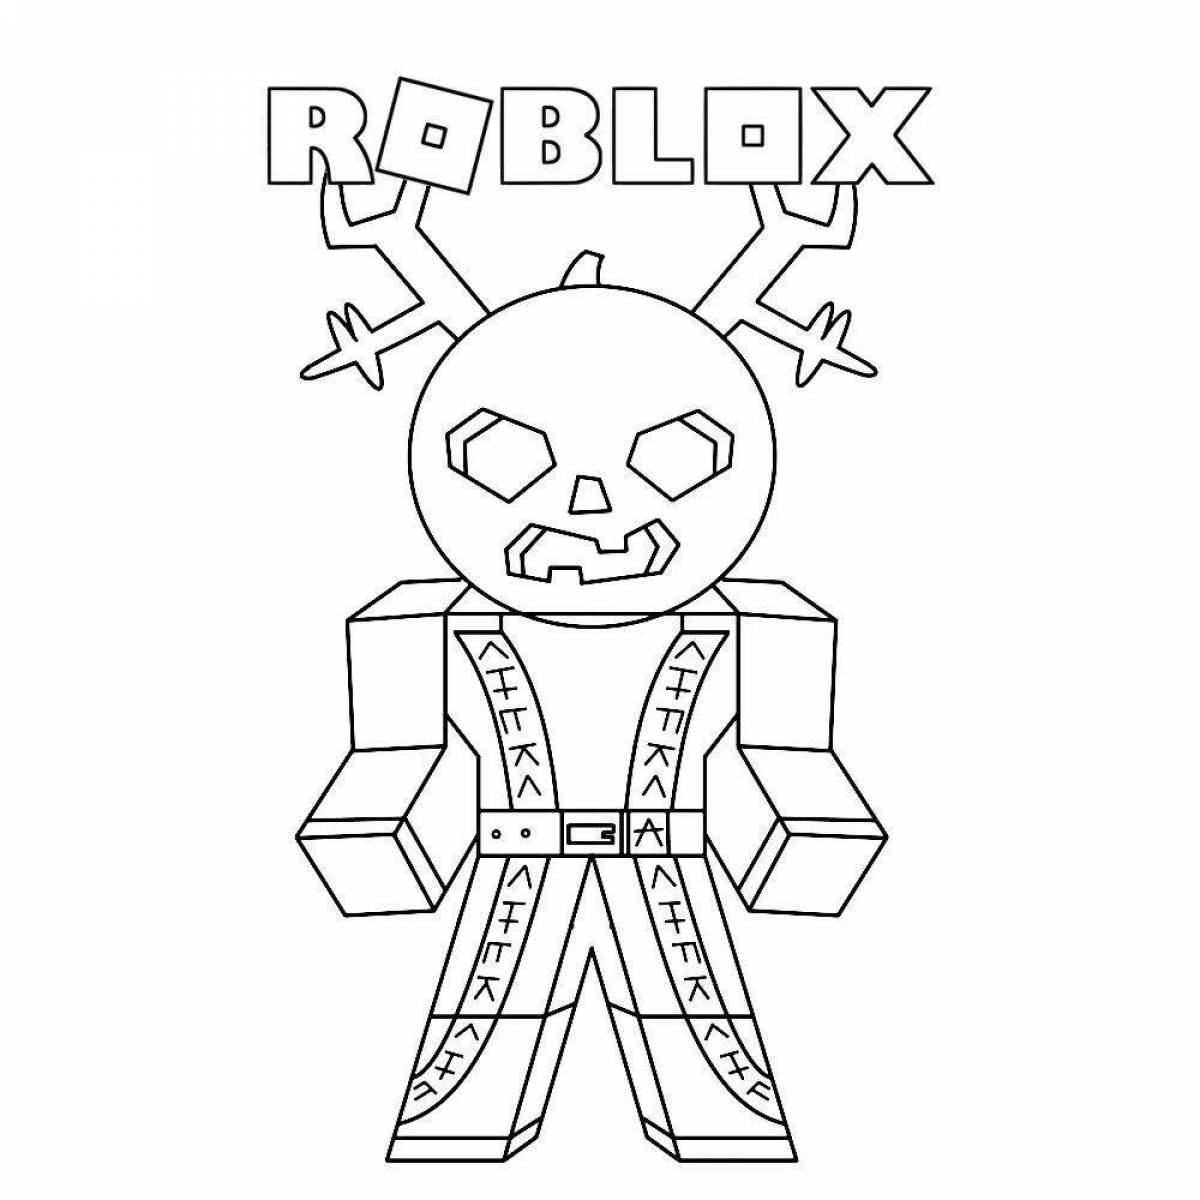 Joyful roblox characters coloring page